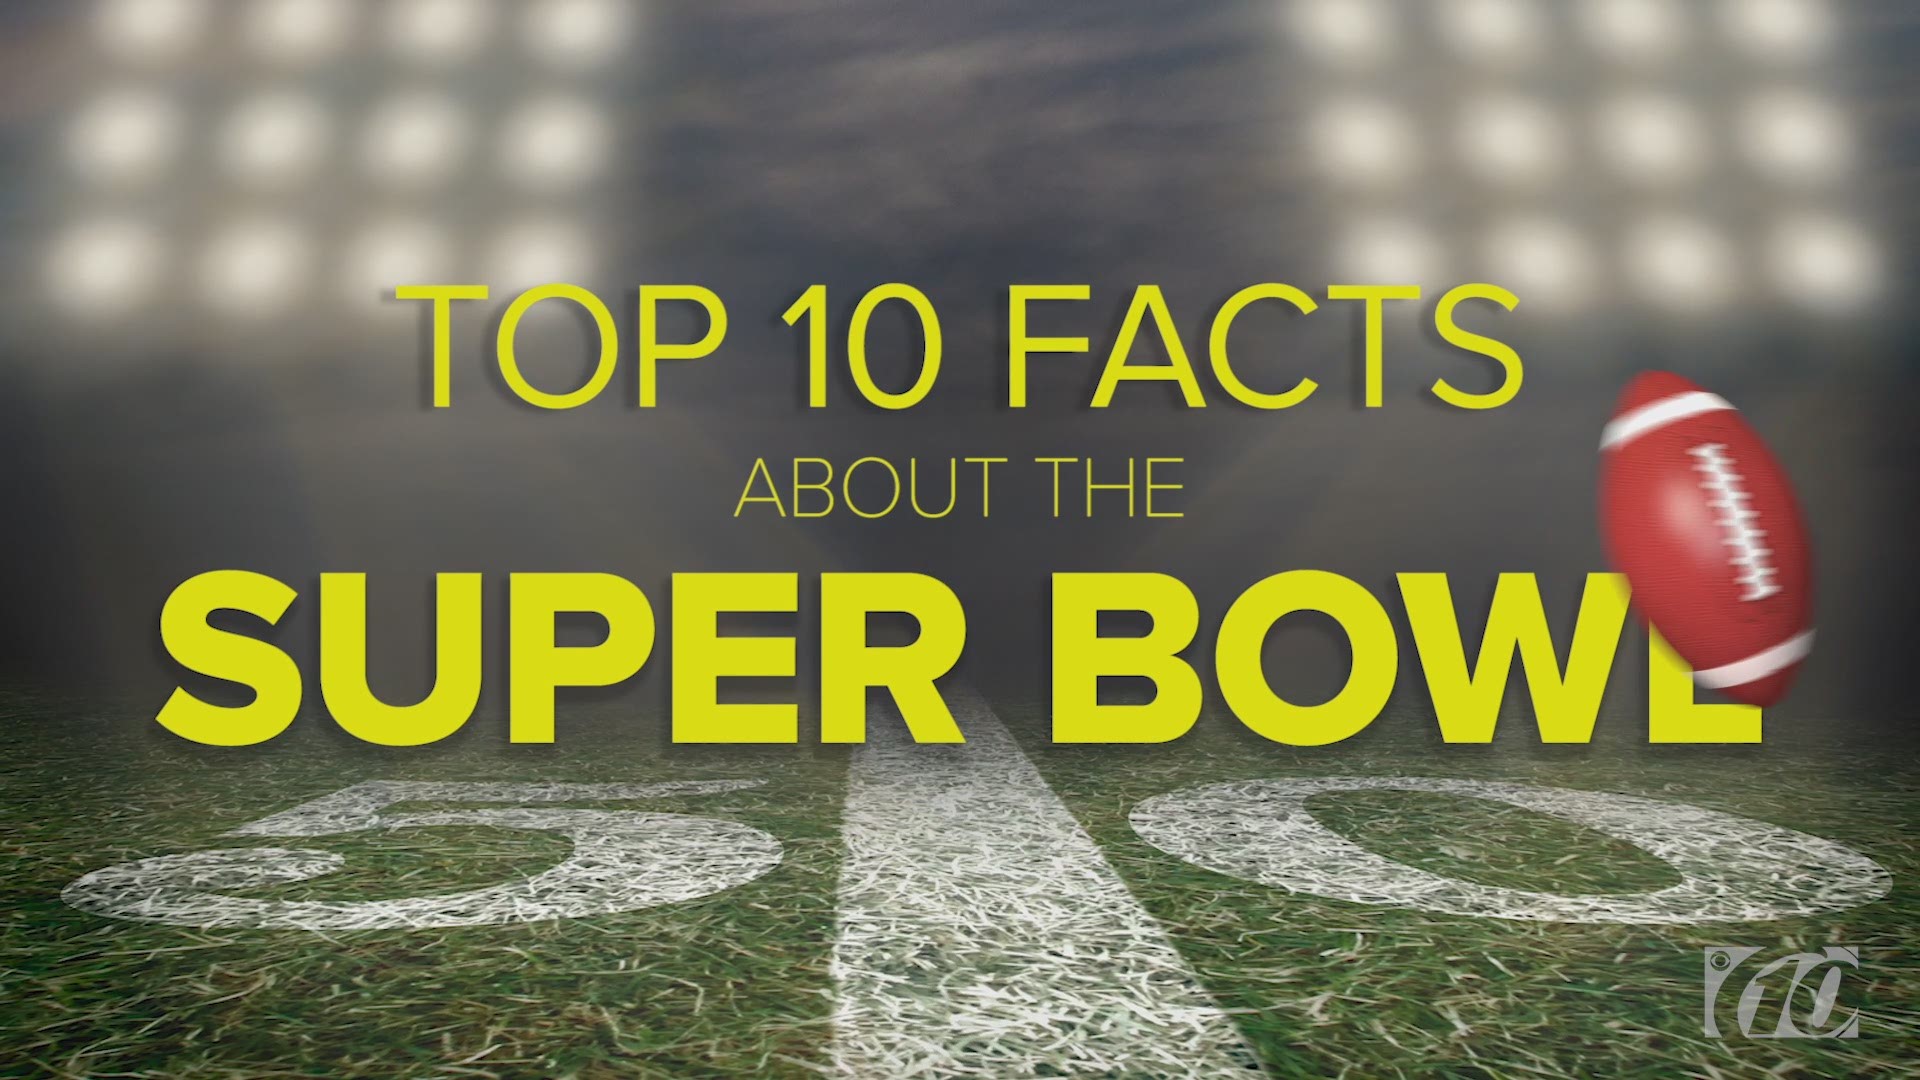 You probably know that the Super Bowl is this Sunday in Miami. However, I bet you didn't know these 10 facts about the Super Bowl.